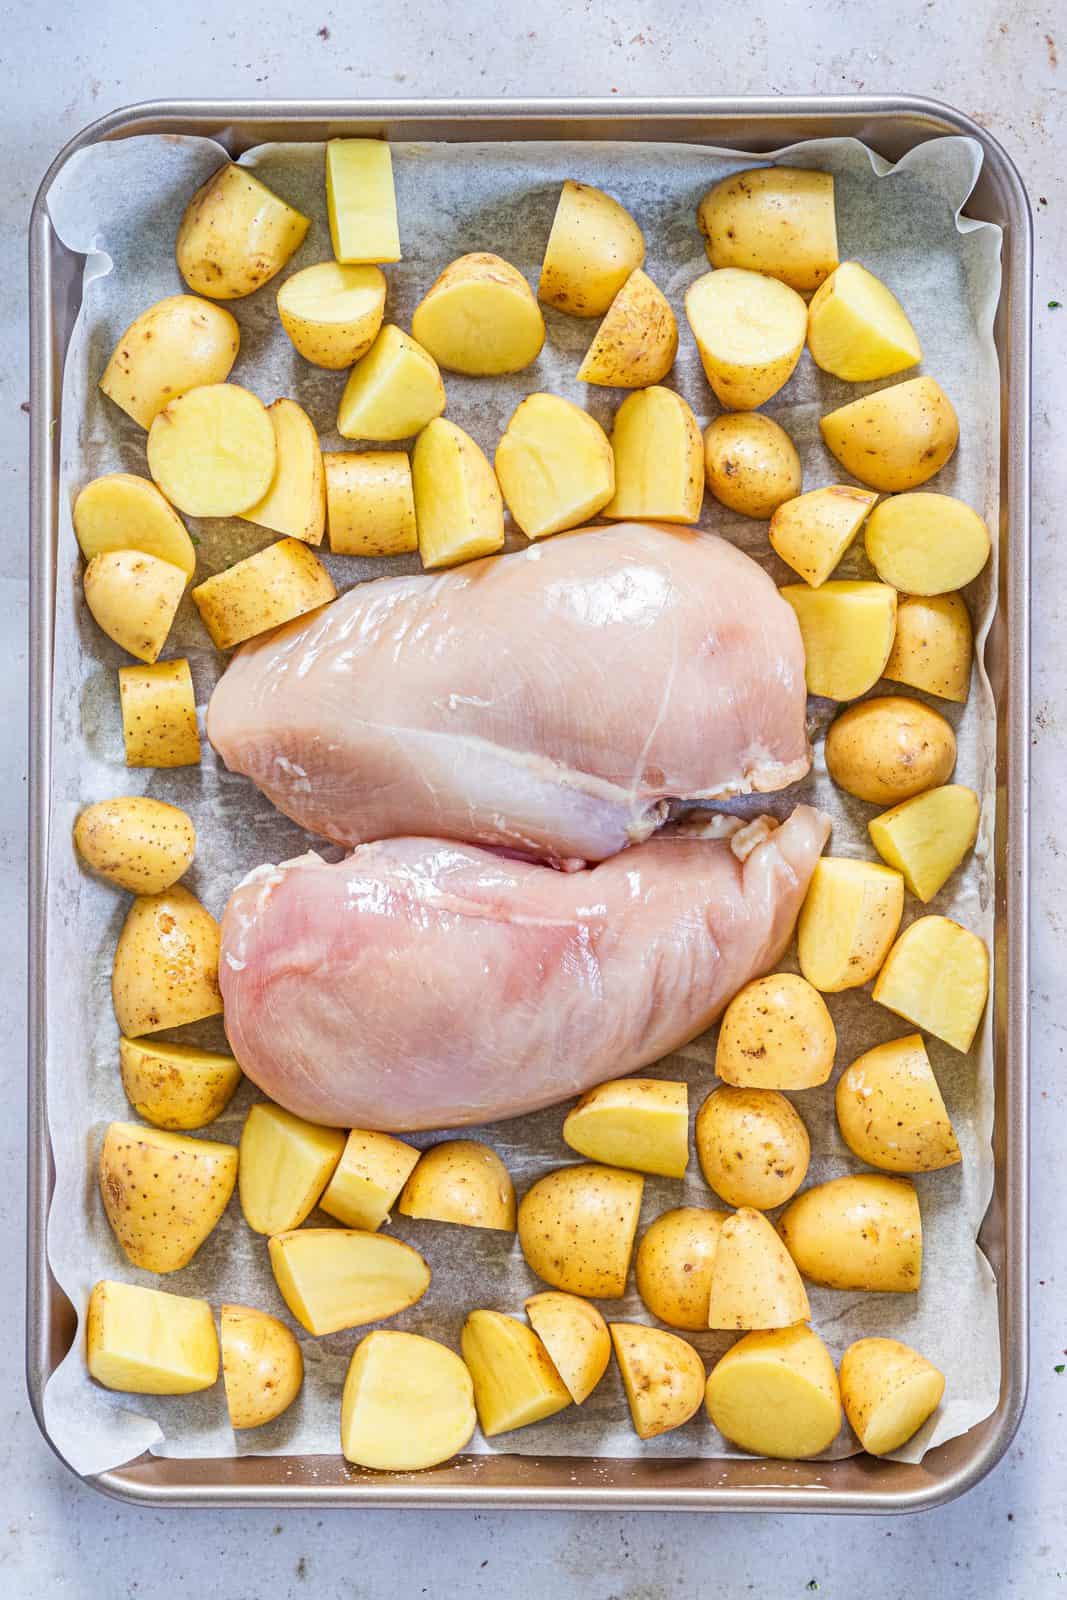 Chicken breasts and potatoes on sheet pan.